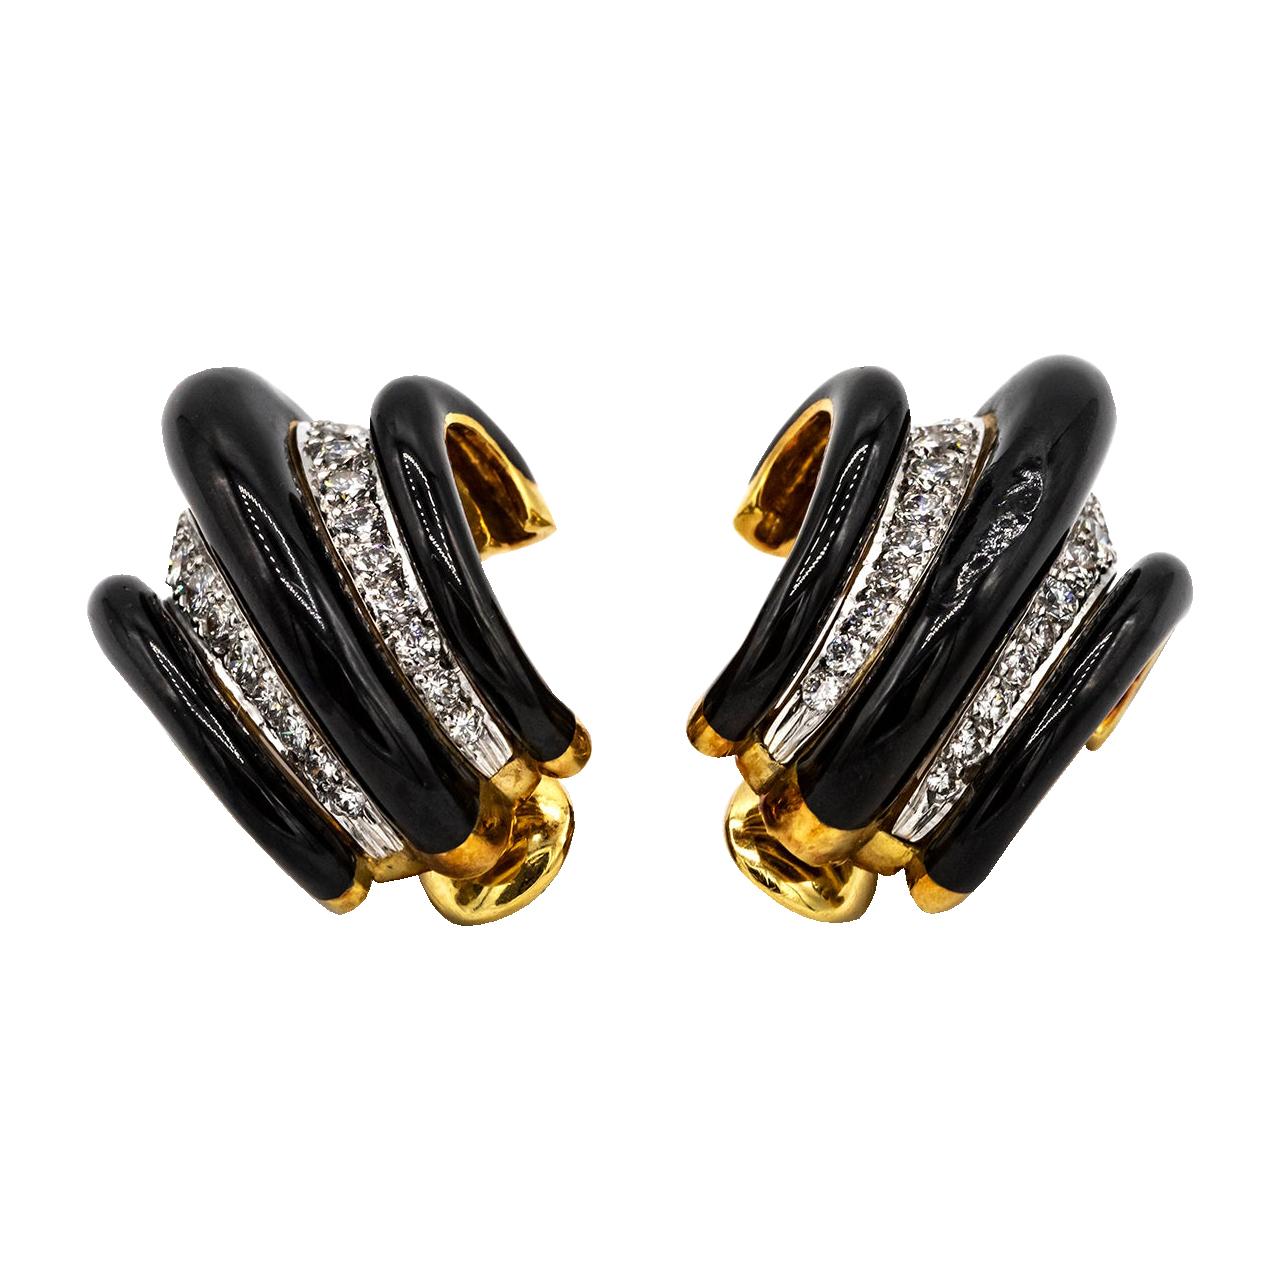 Get a great look with this vintage David Webb enamel and diamond ear clips. Shrimp style earrings will become your favorite to wear out or to the office. Each designed with alternating diamond-set platinum panels and black enamel.

Length: